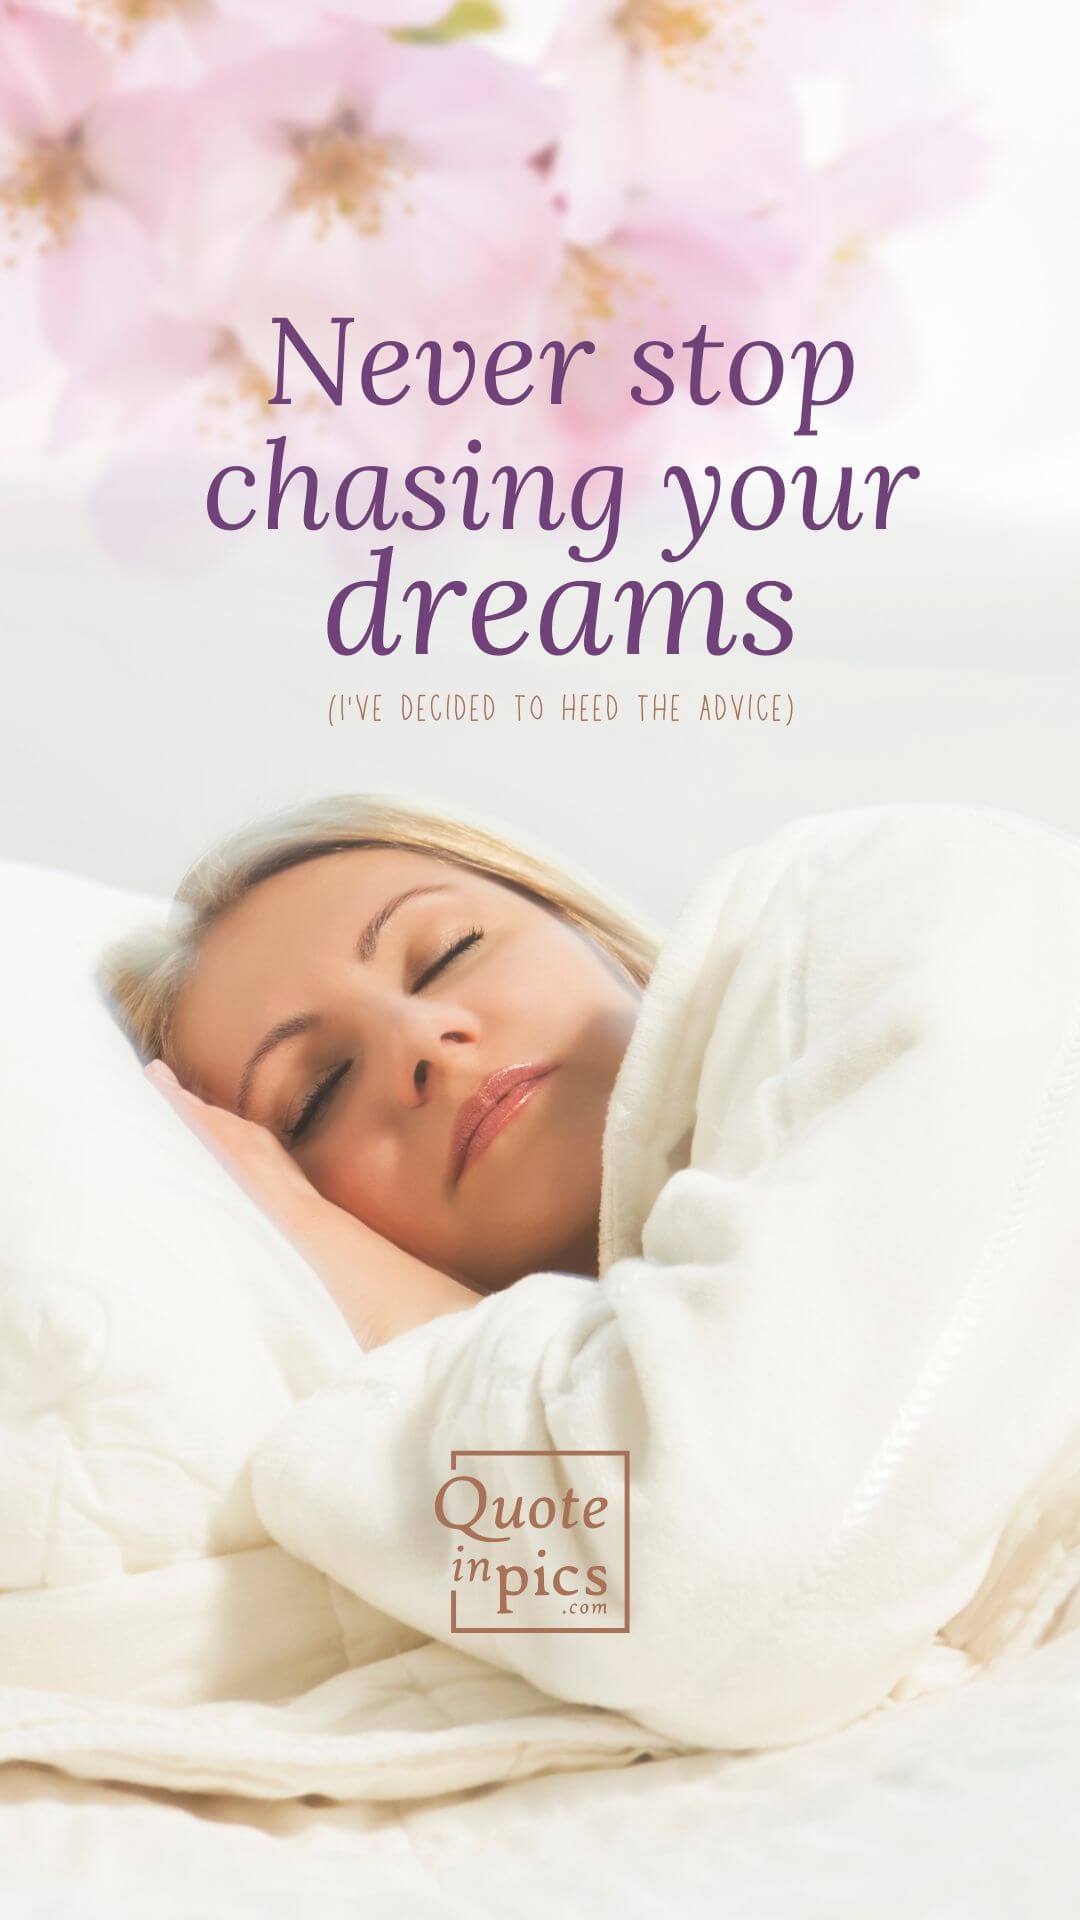 Never stop chasing your dreams... OK, I'll sleep then!